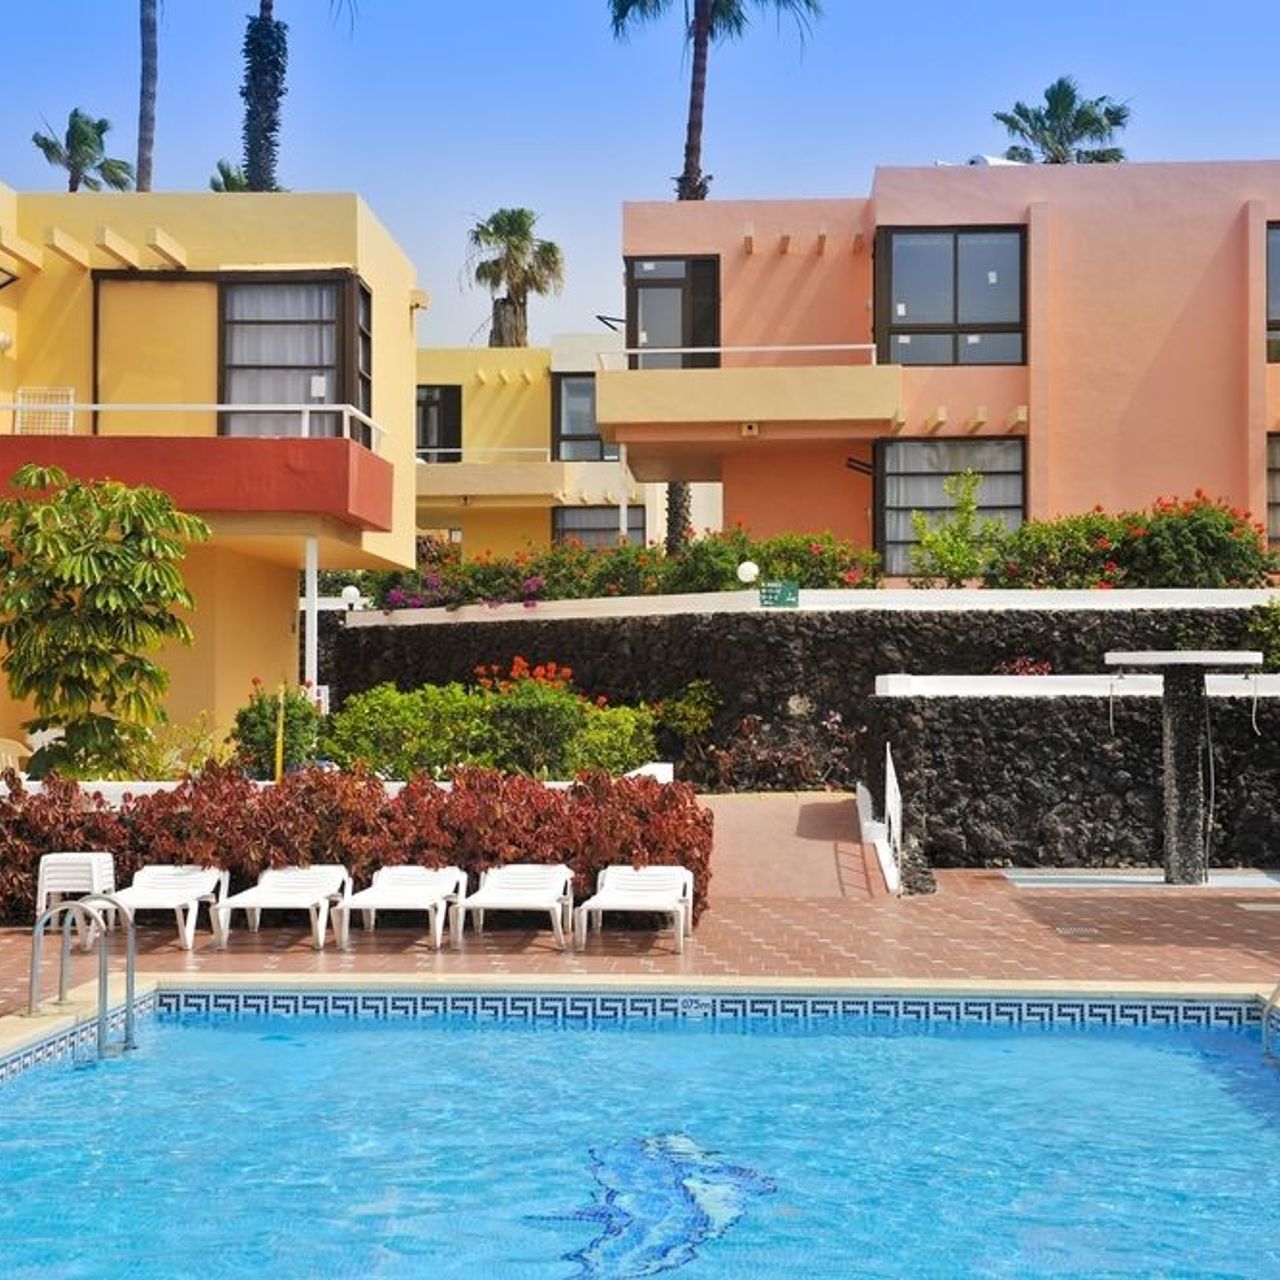 Hotel Sunclub Paraíso del Sol - Canary Islands - Great prices at HOTEL INFO